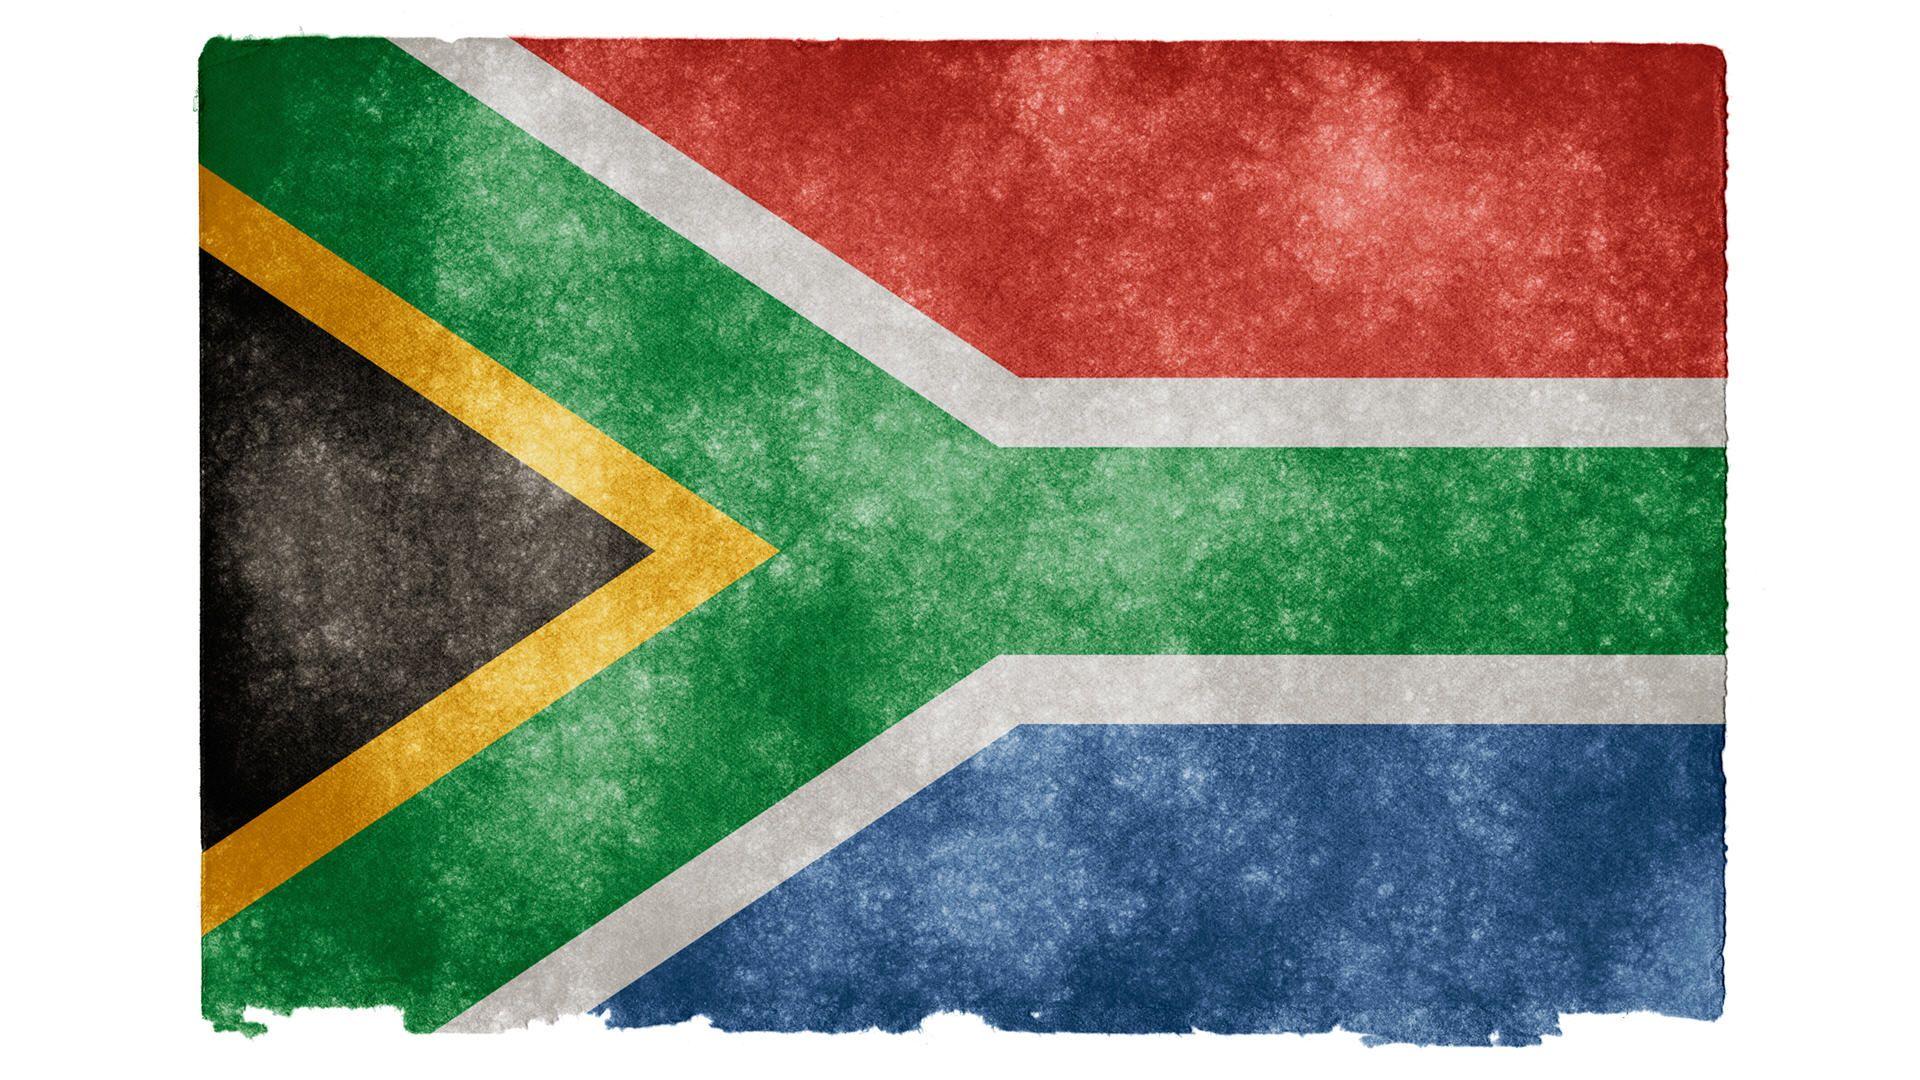 Free Download South Africa Flag Wallpaper HD 1920x1080